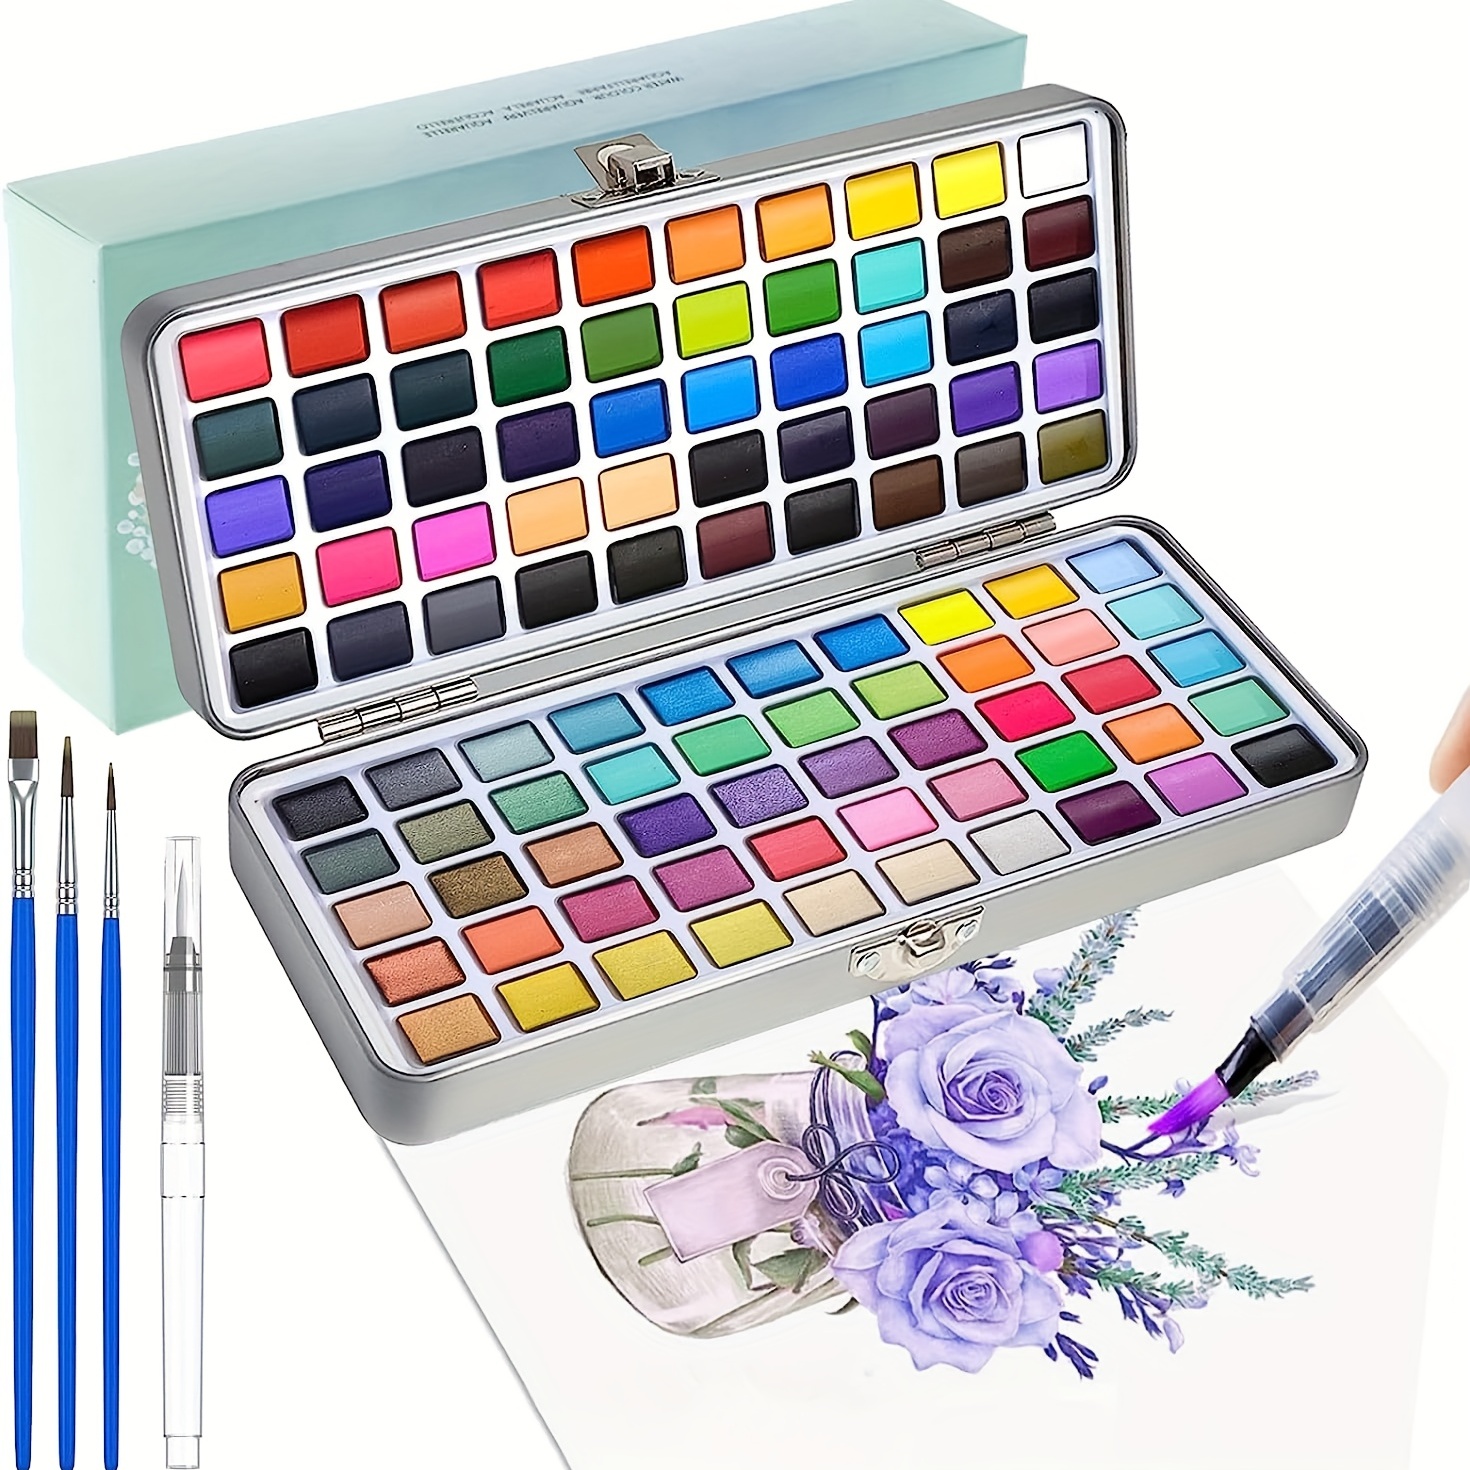 MEEDEN 37 Pcs Watercolor Painting Kit with 24x12ML Watercolor